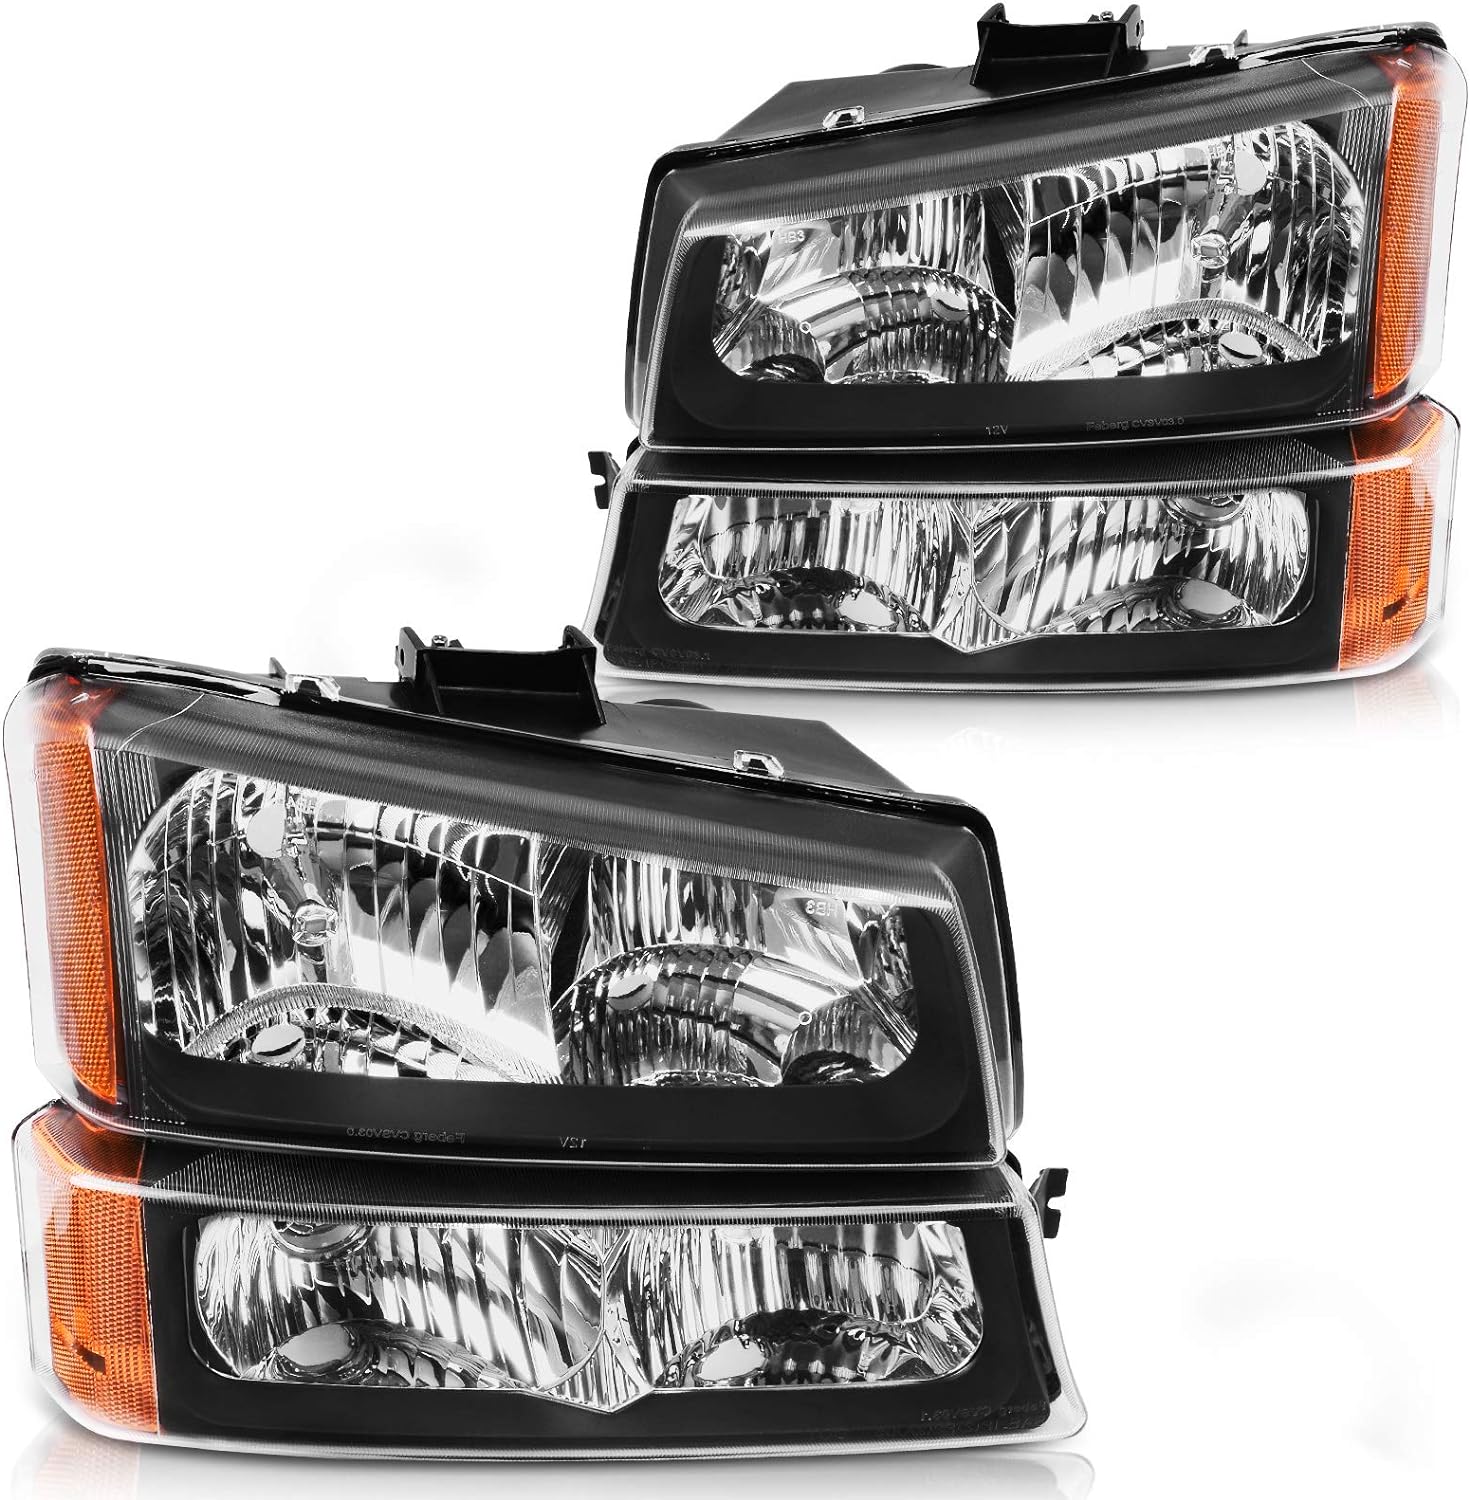 DWVO Headlights Assembly Compatible with 2003 2004 2005 2006 Chevy Silverado Avalanche 1500 2500 3500 (Black Housing Amber Reflector)